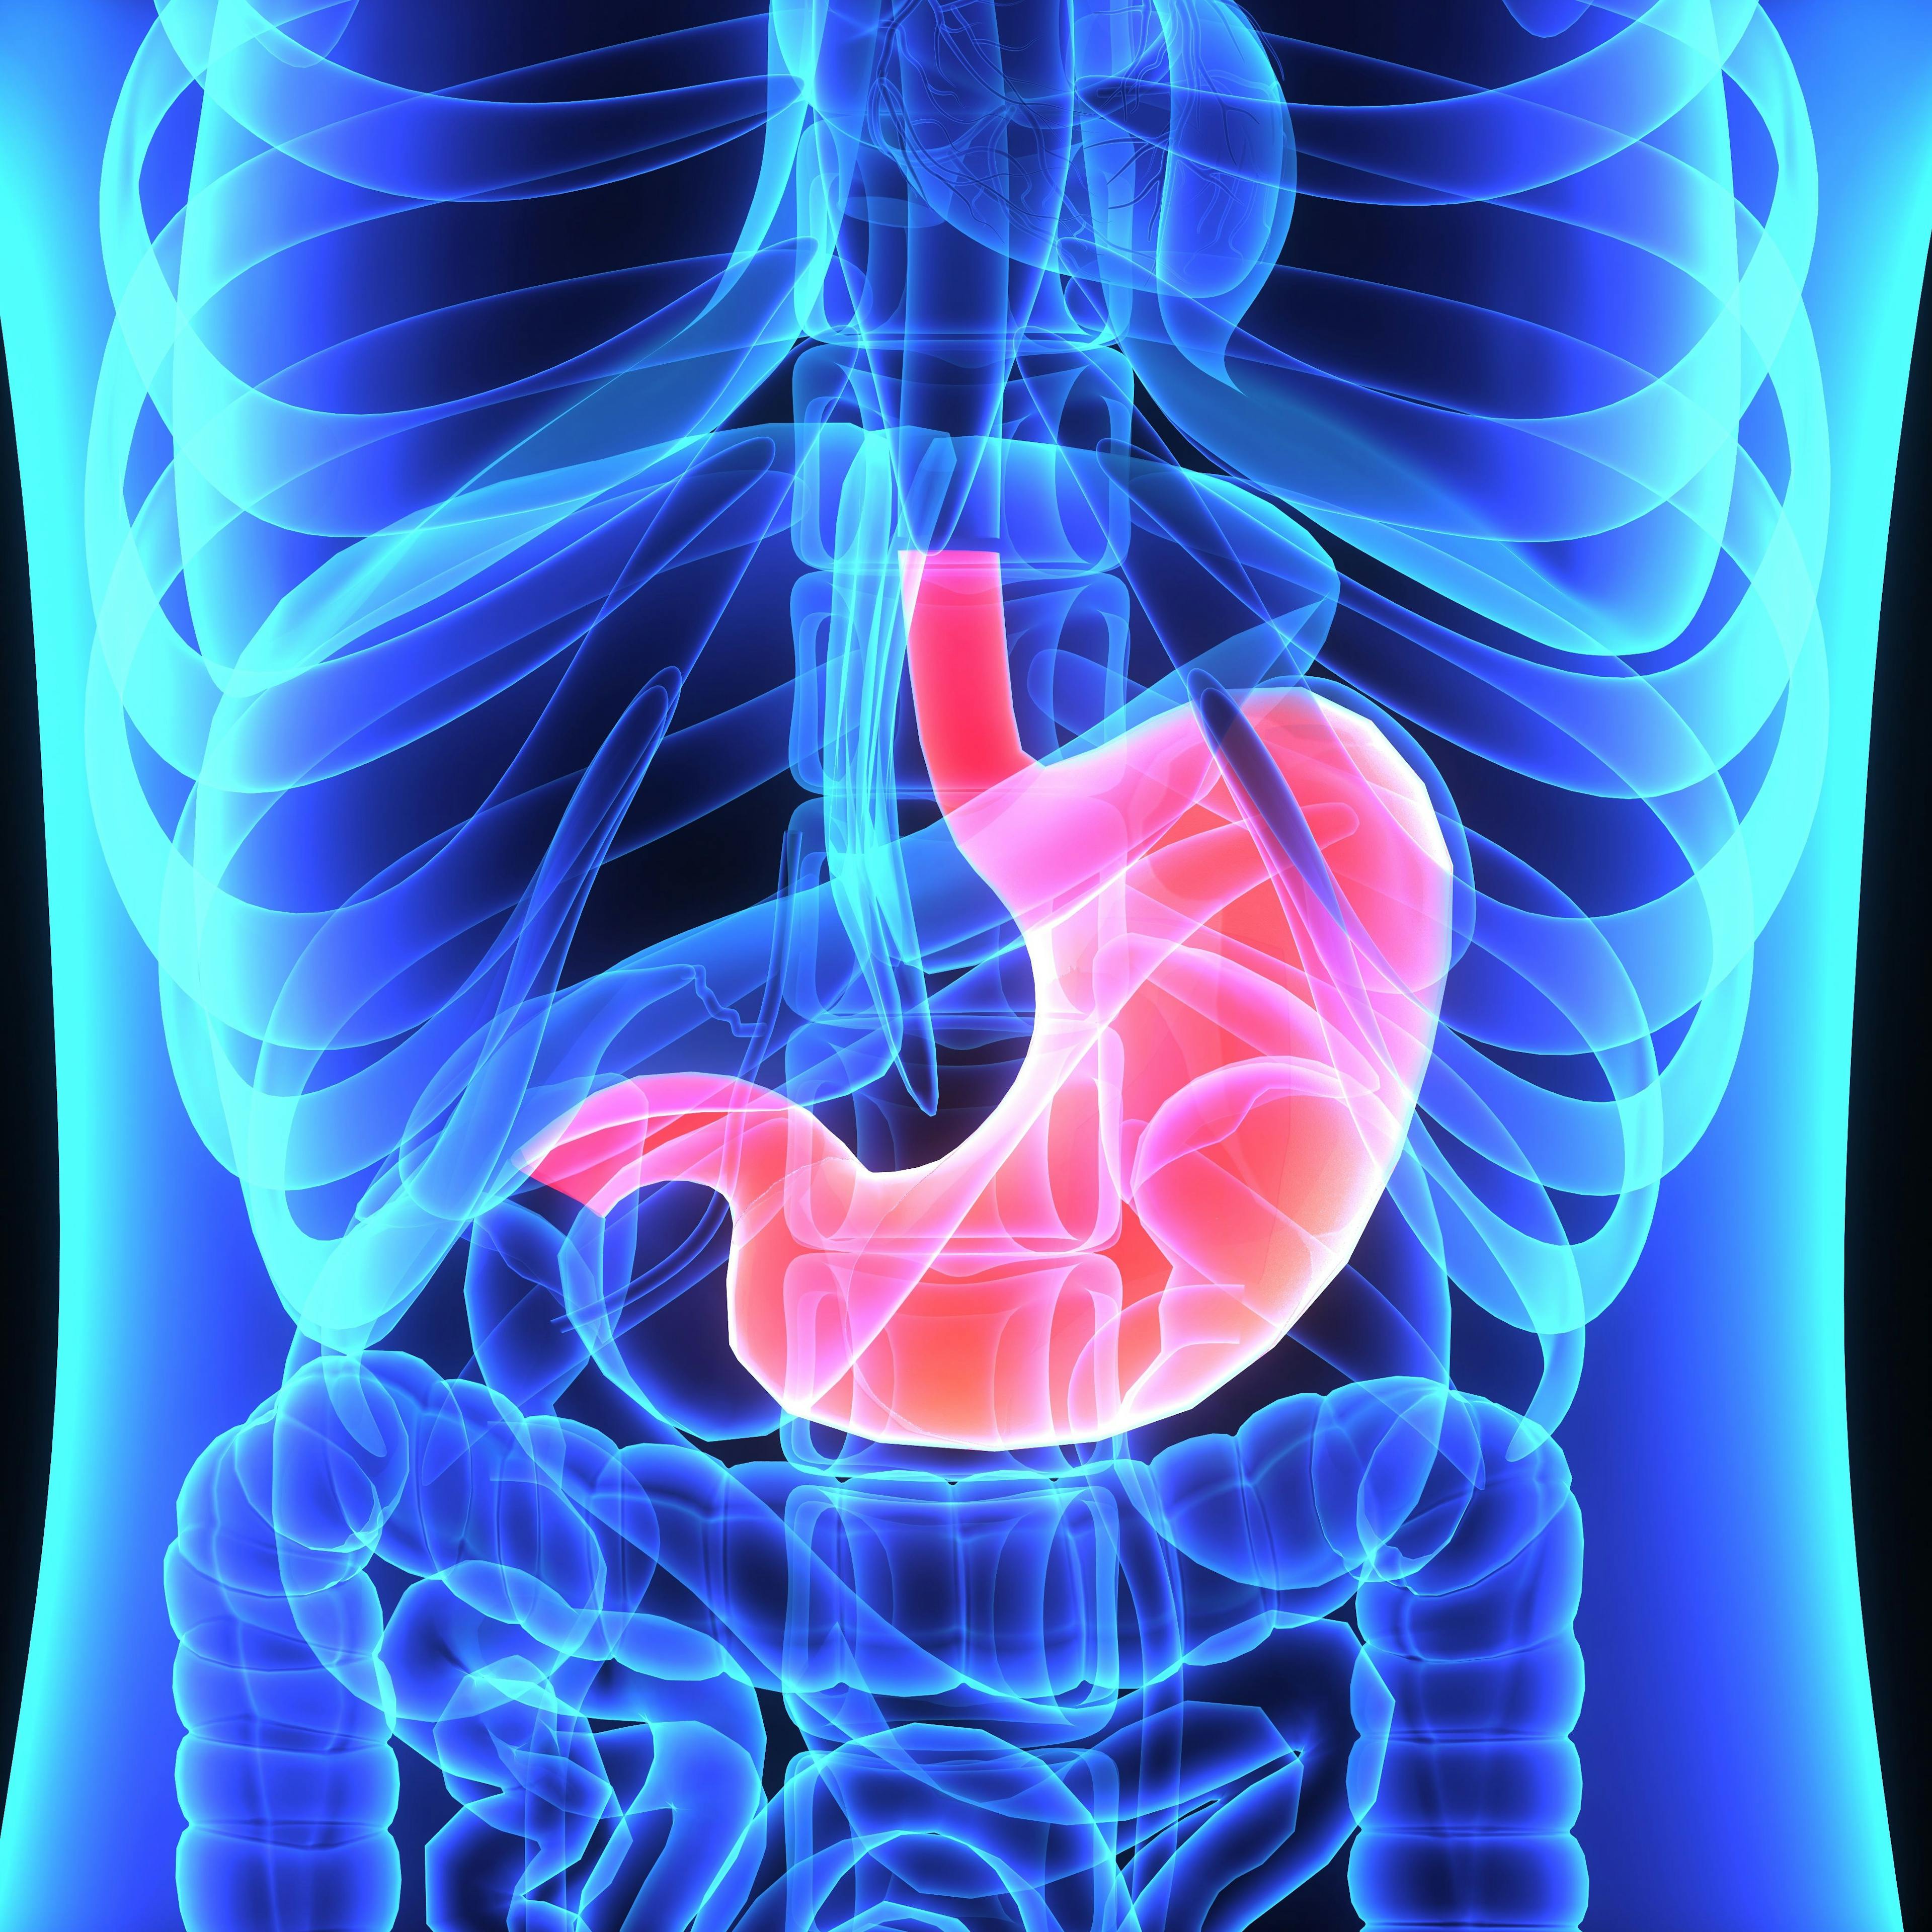 Patients with HER2-positive advanced gastric or gastroesophageal junction adenocarcinoma in the European Union can now receive treatment with fam-trastuzumab deruxtecan-nxki following its approval.